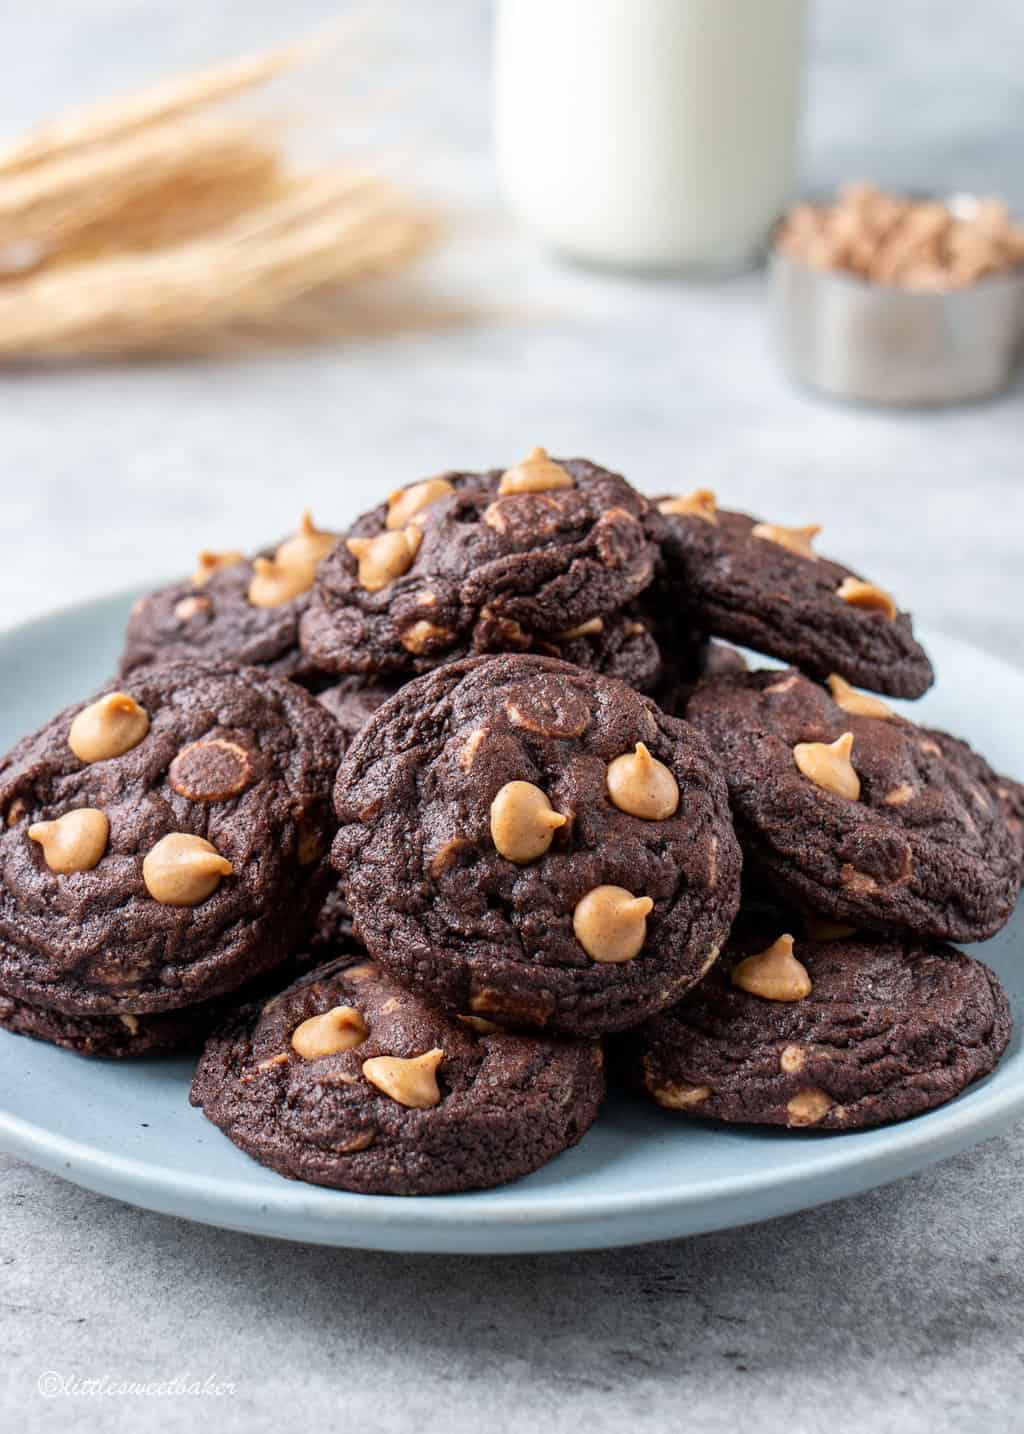 A plate of chocolate peanut butter chip cookies